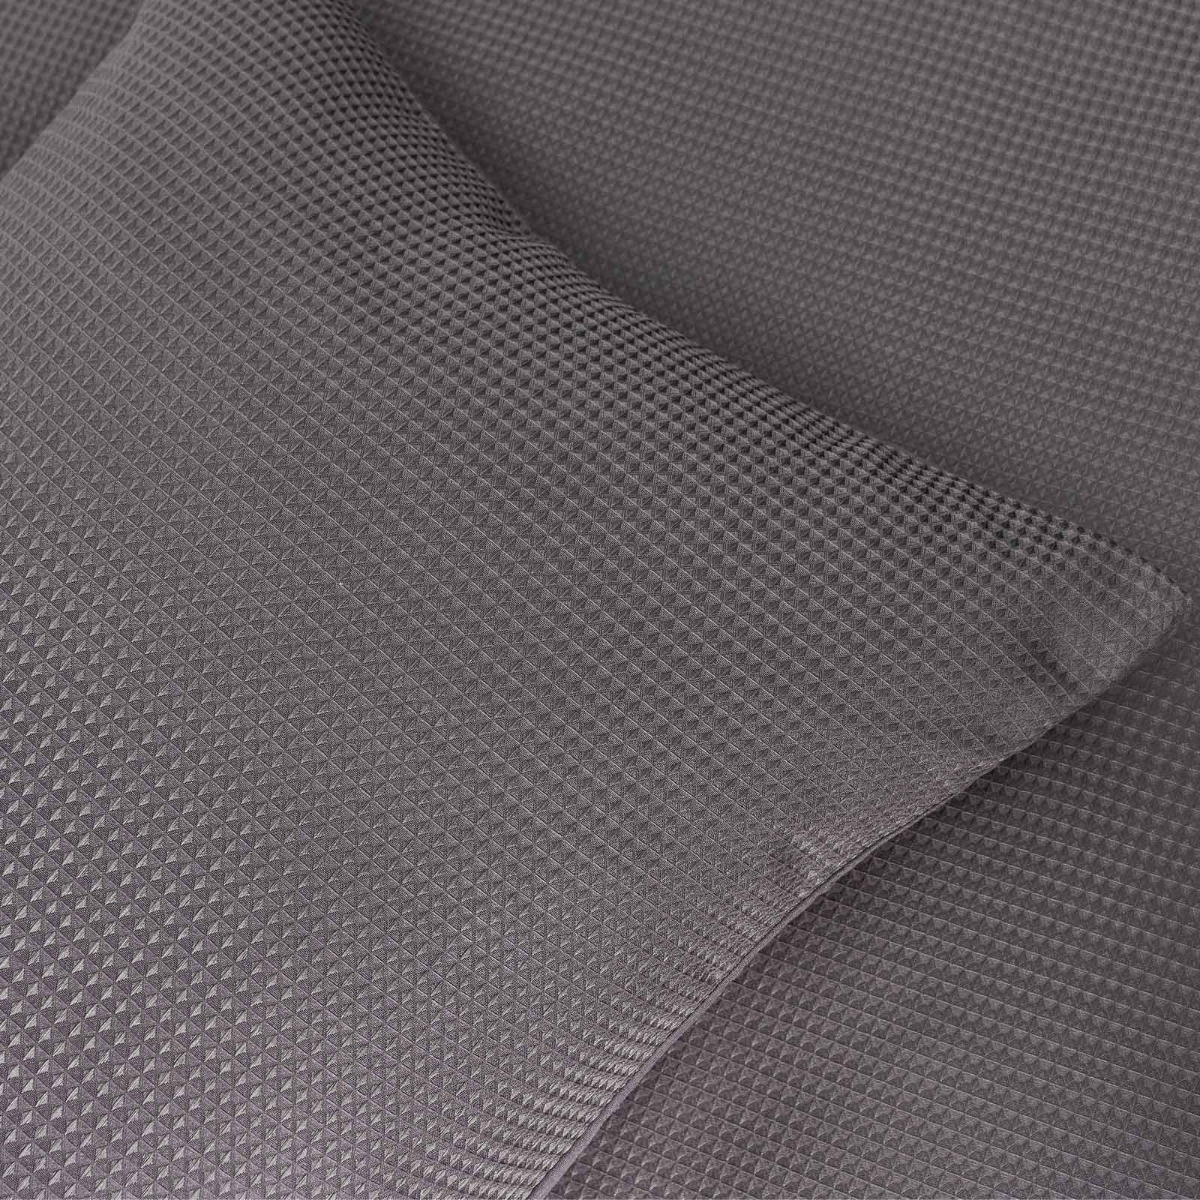 Sienna Waffle Weave Duvet Cover Set - Charcoal>